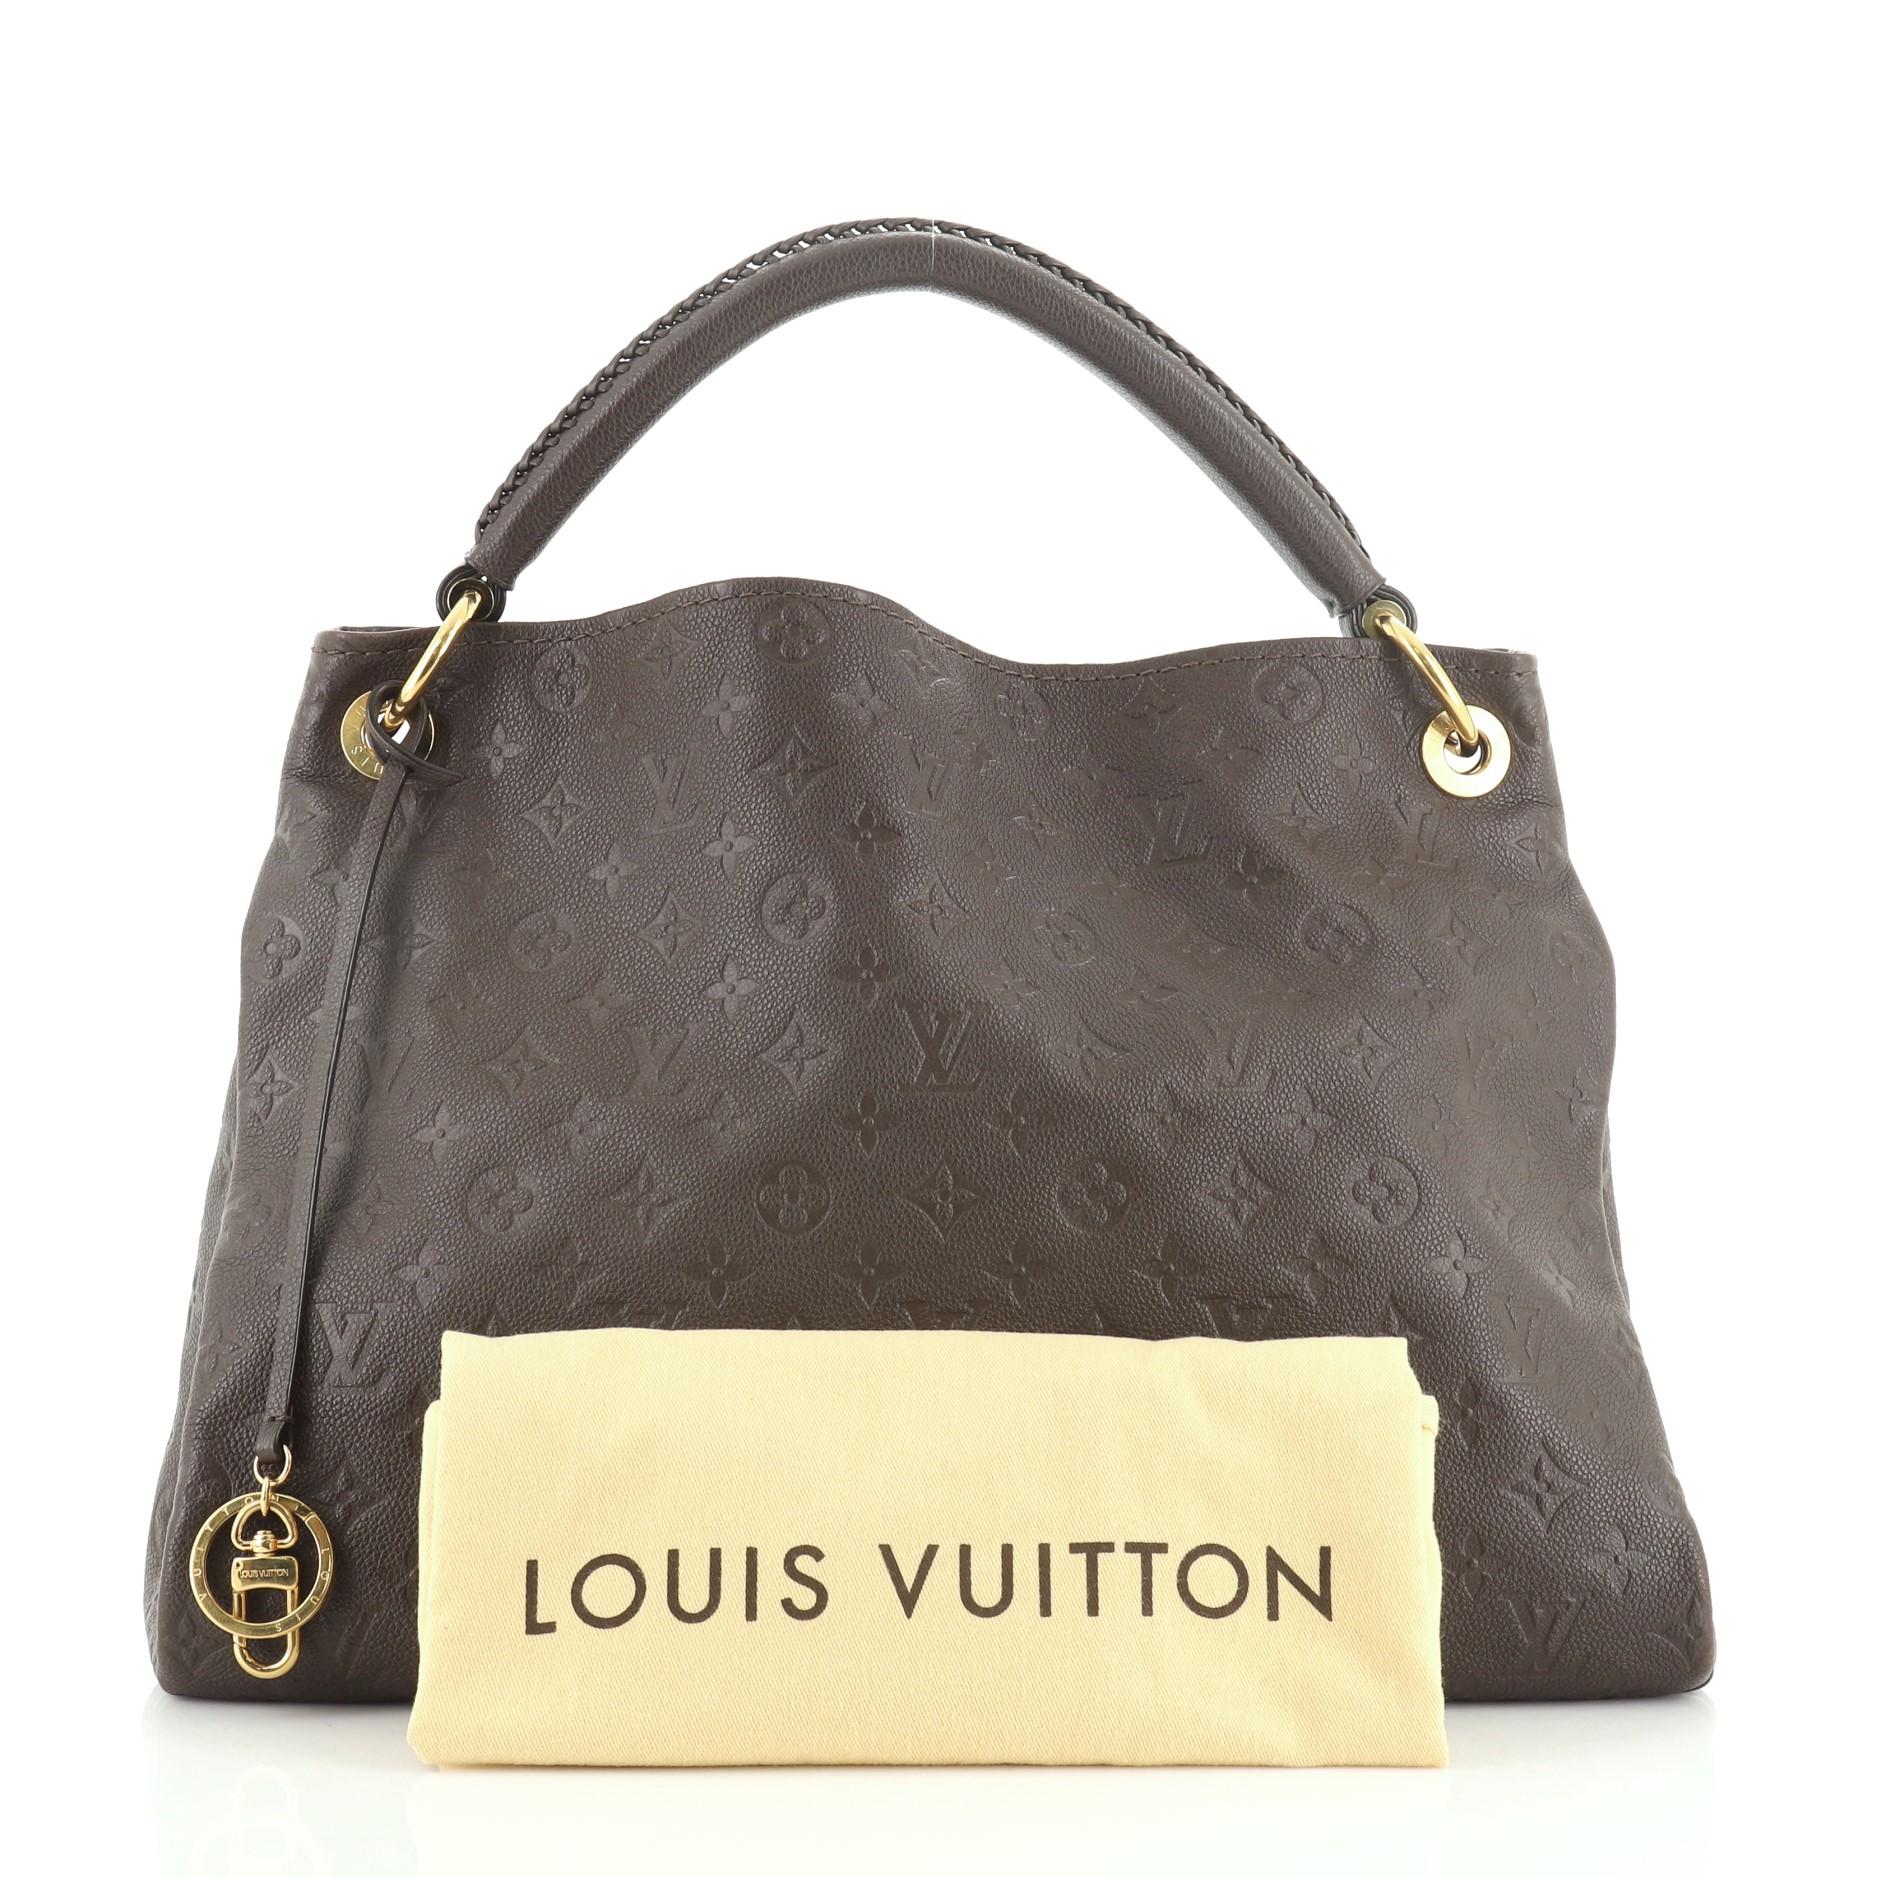 This Louis Vuitton Artsy Handbag Monogram Empreinte Leather MM, is an ideal everyday piece refined by its craftsmanship and functional features. Crafted from brown monogram empreinte leather, features a single looped braided top handle, protective